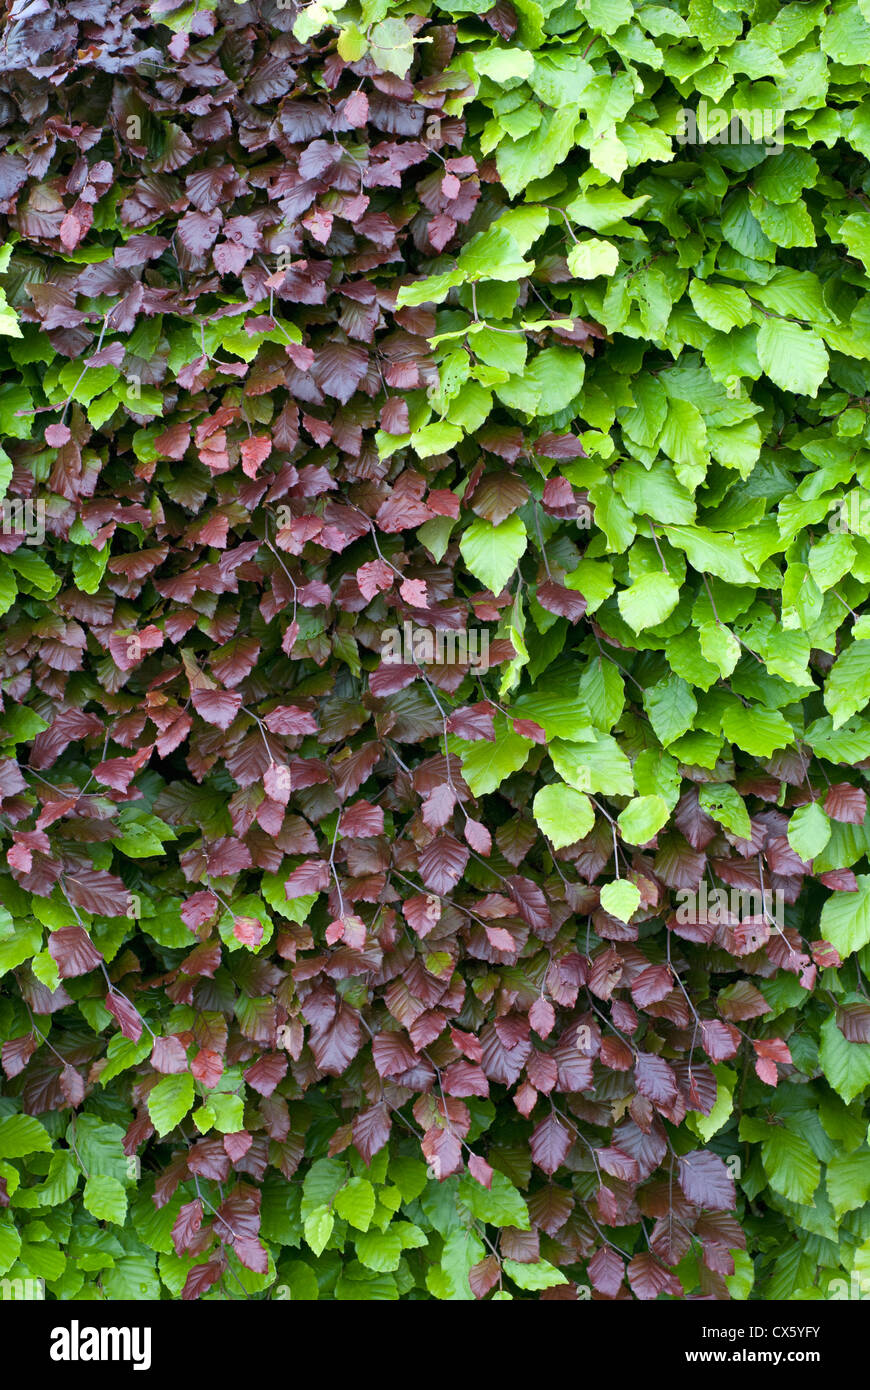 Beech hedge leaves green and purple Stock Photo